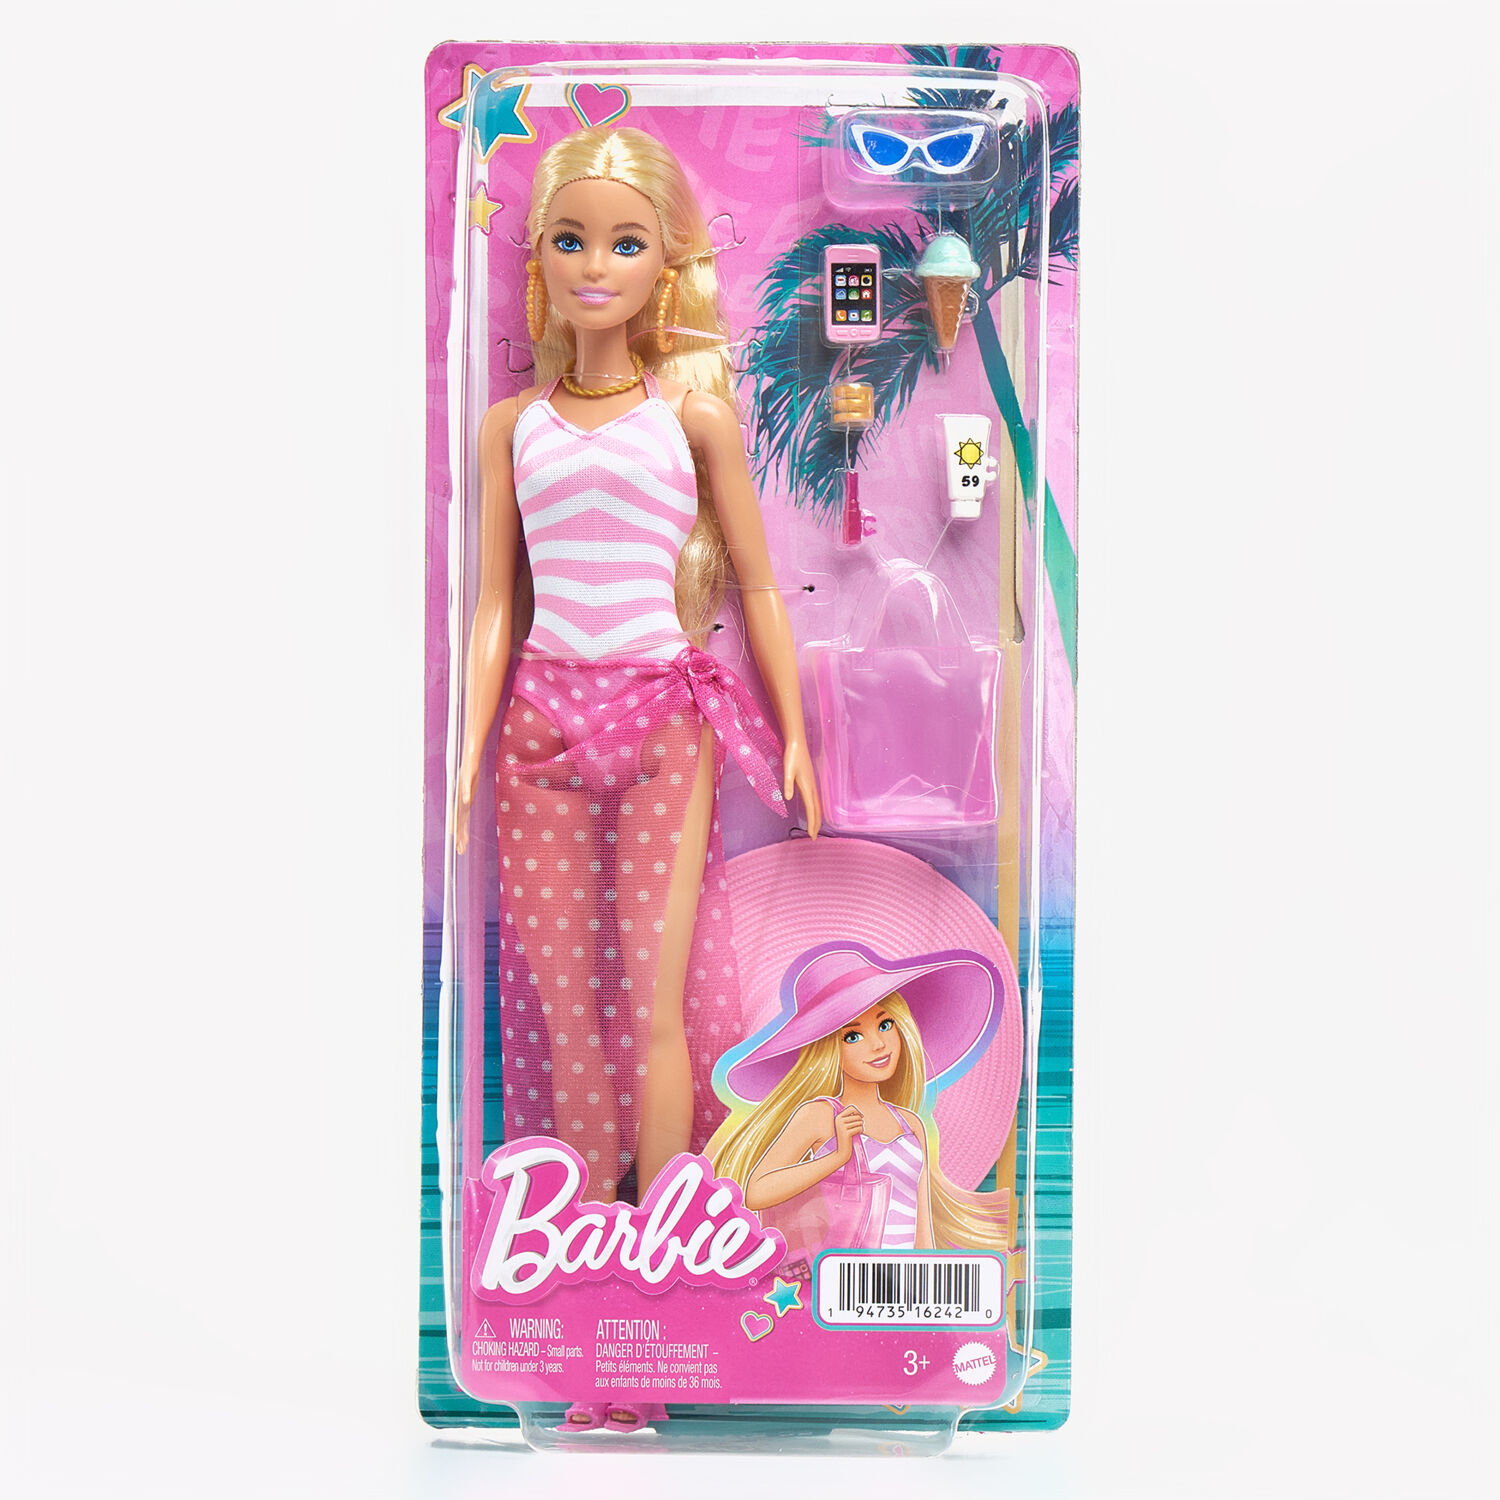 Barbie Beach Doll with Pink Graphic One-Piece Swimsuit